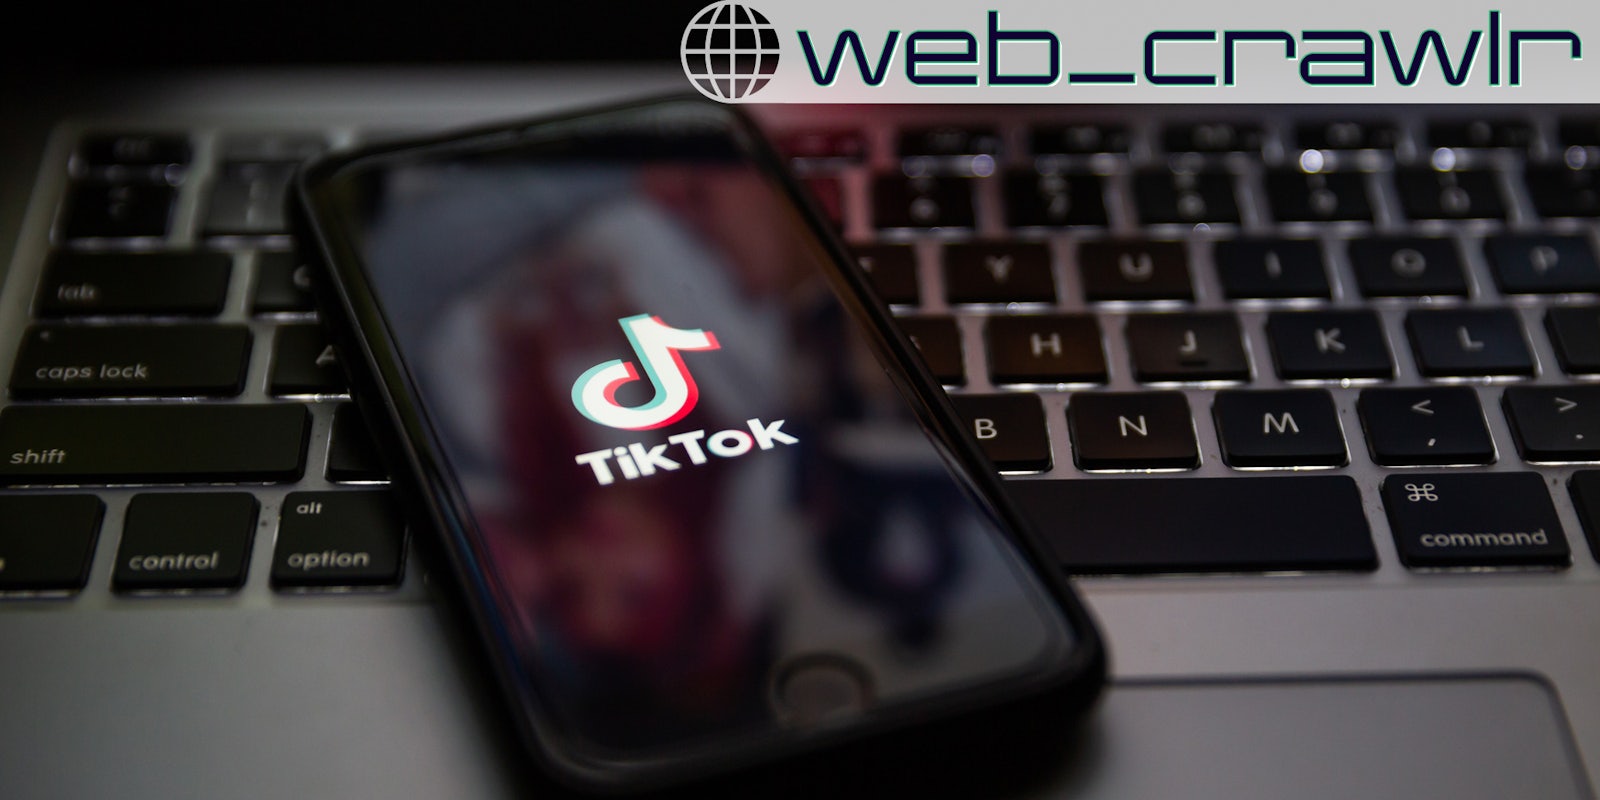 A phone with the TikTok logo on it sitting on a laptop. The Daily Dot newsletter web_crawlr logo is in the top right corner.